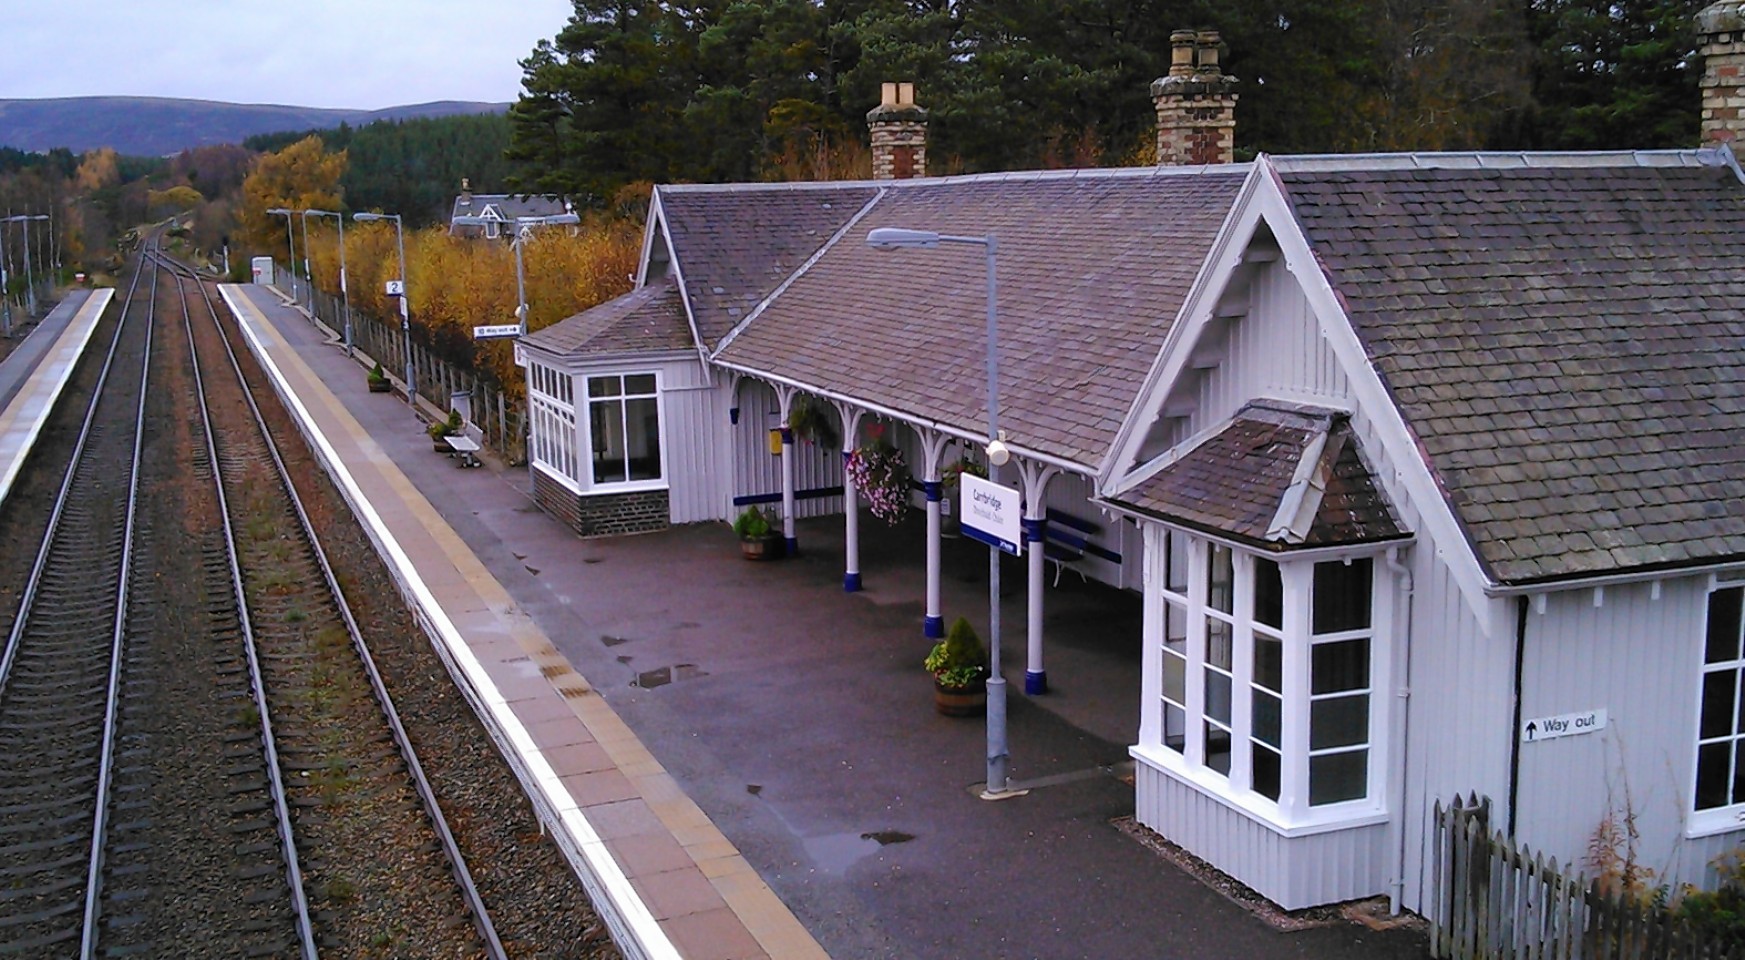 ScotRail must get listed building consent before CCTV cameras can be installed at Carrbridge station